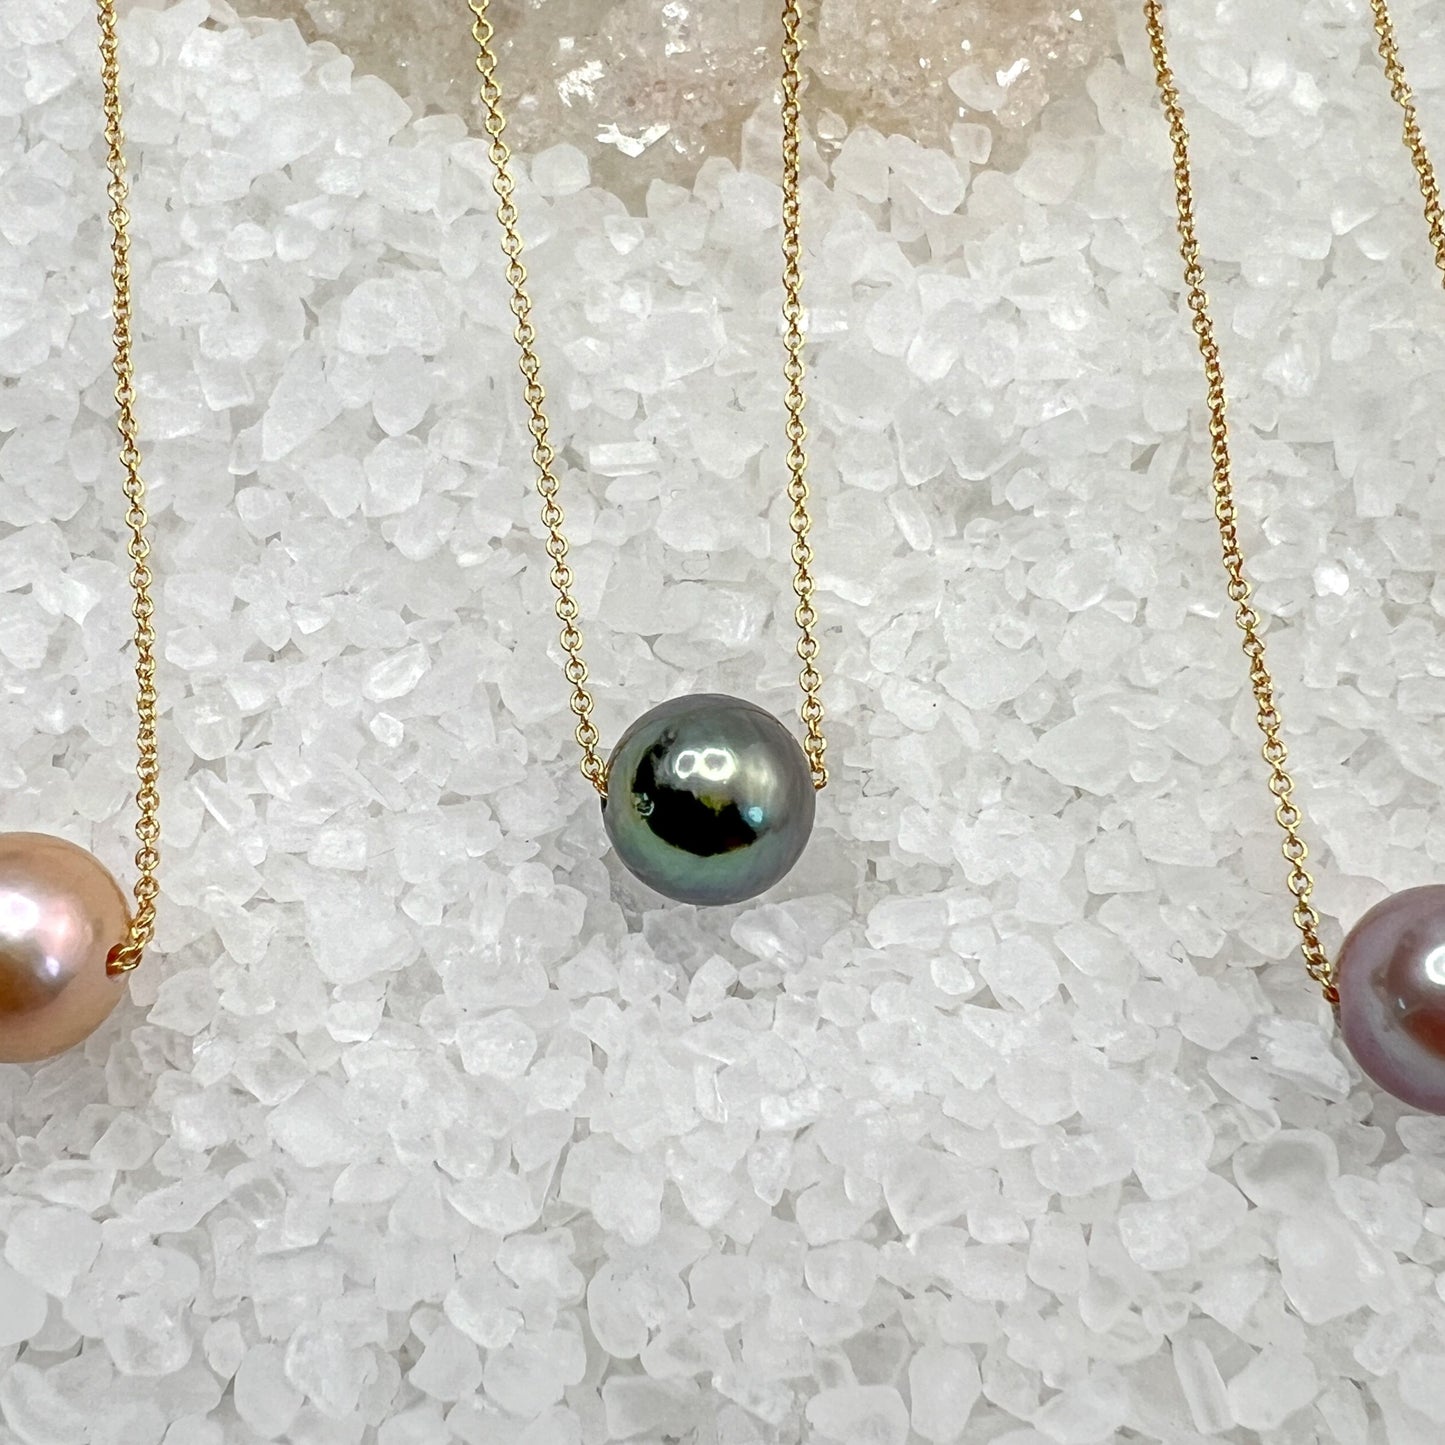 Edison Pearl floater necklace